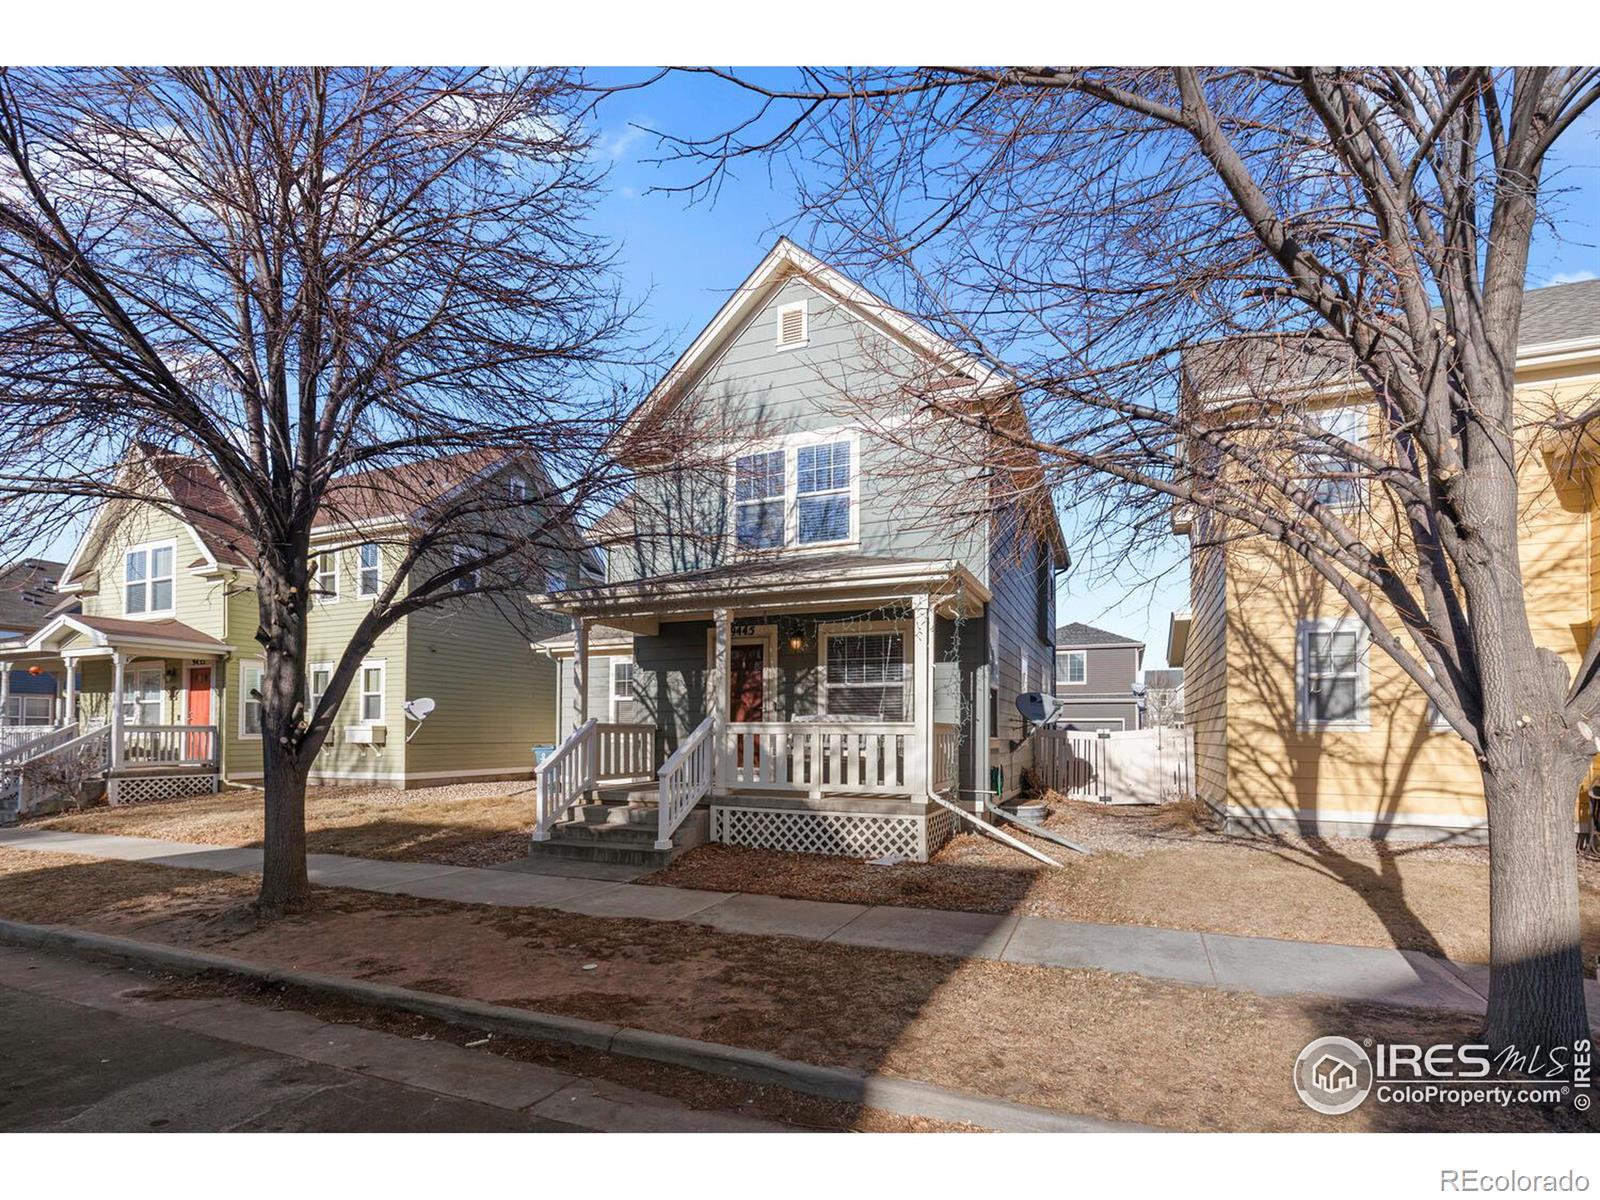 Report Image for 9445 E 108th Place,Commerce City, Colorado